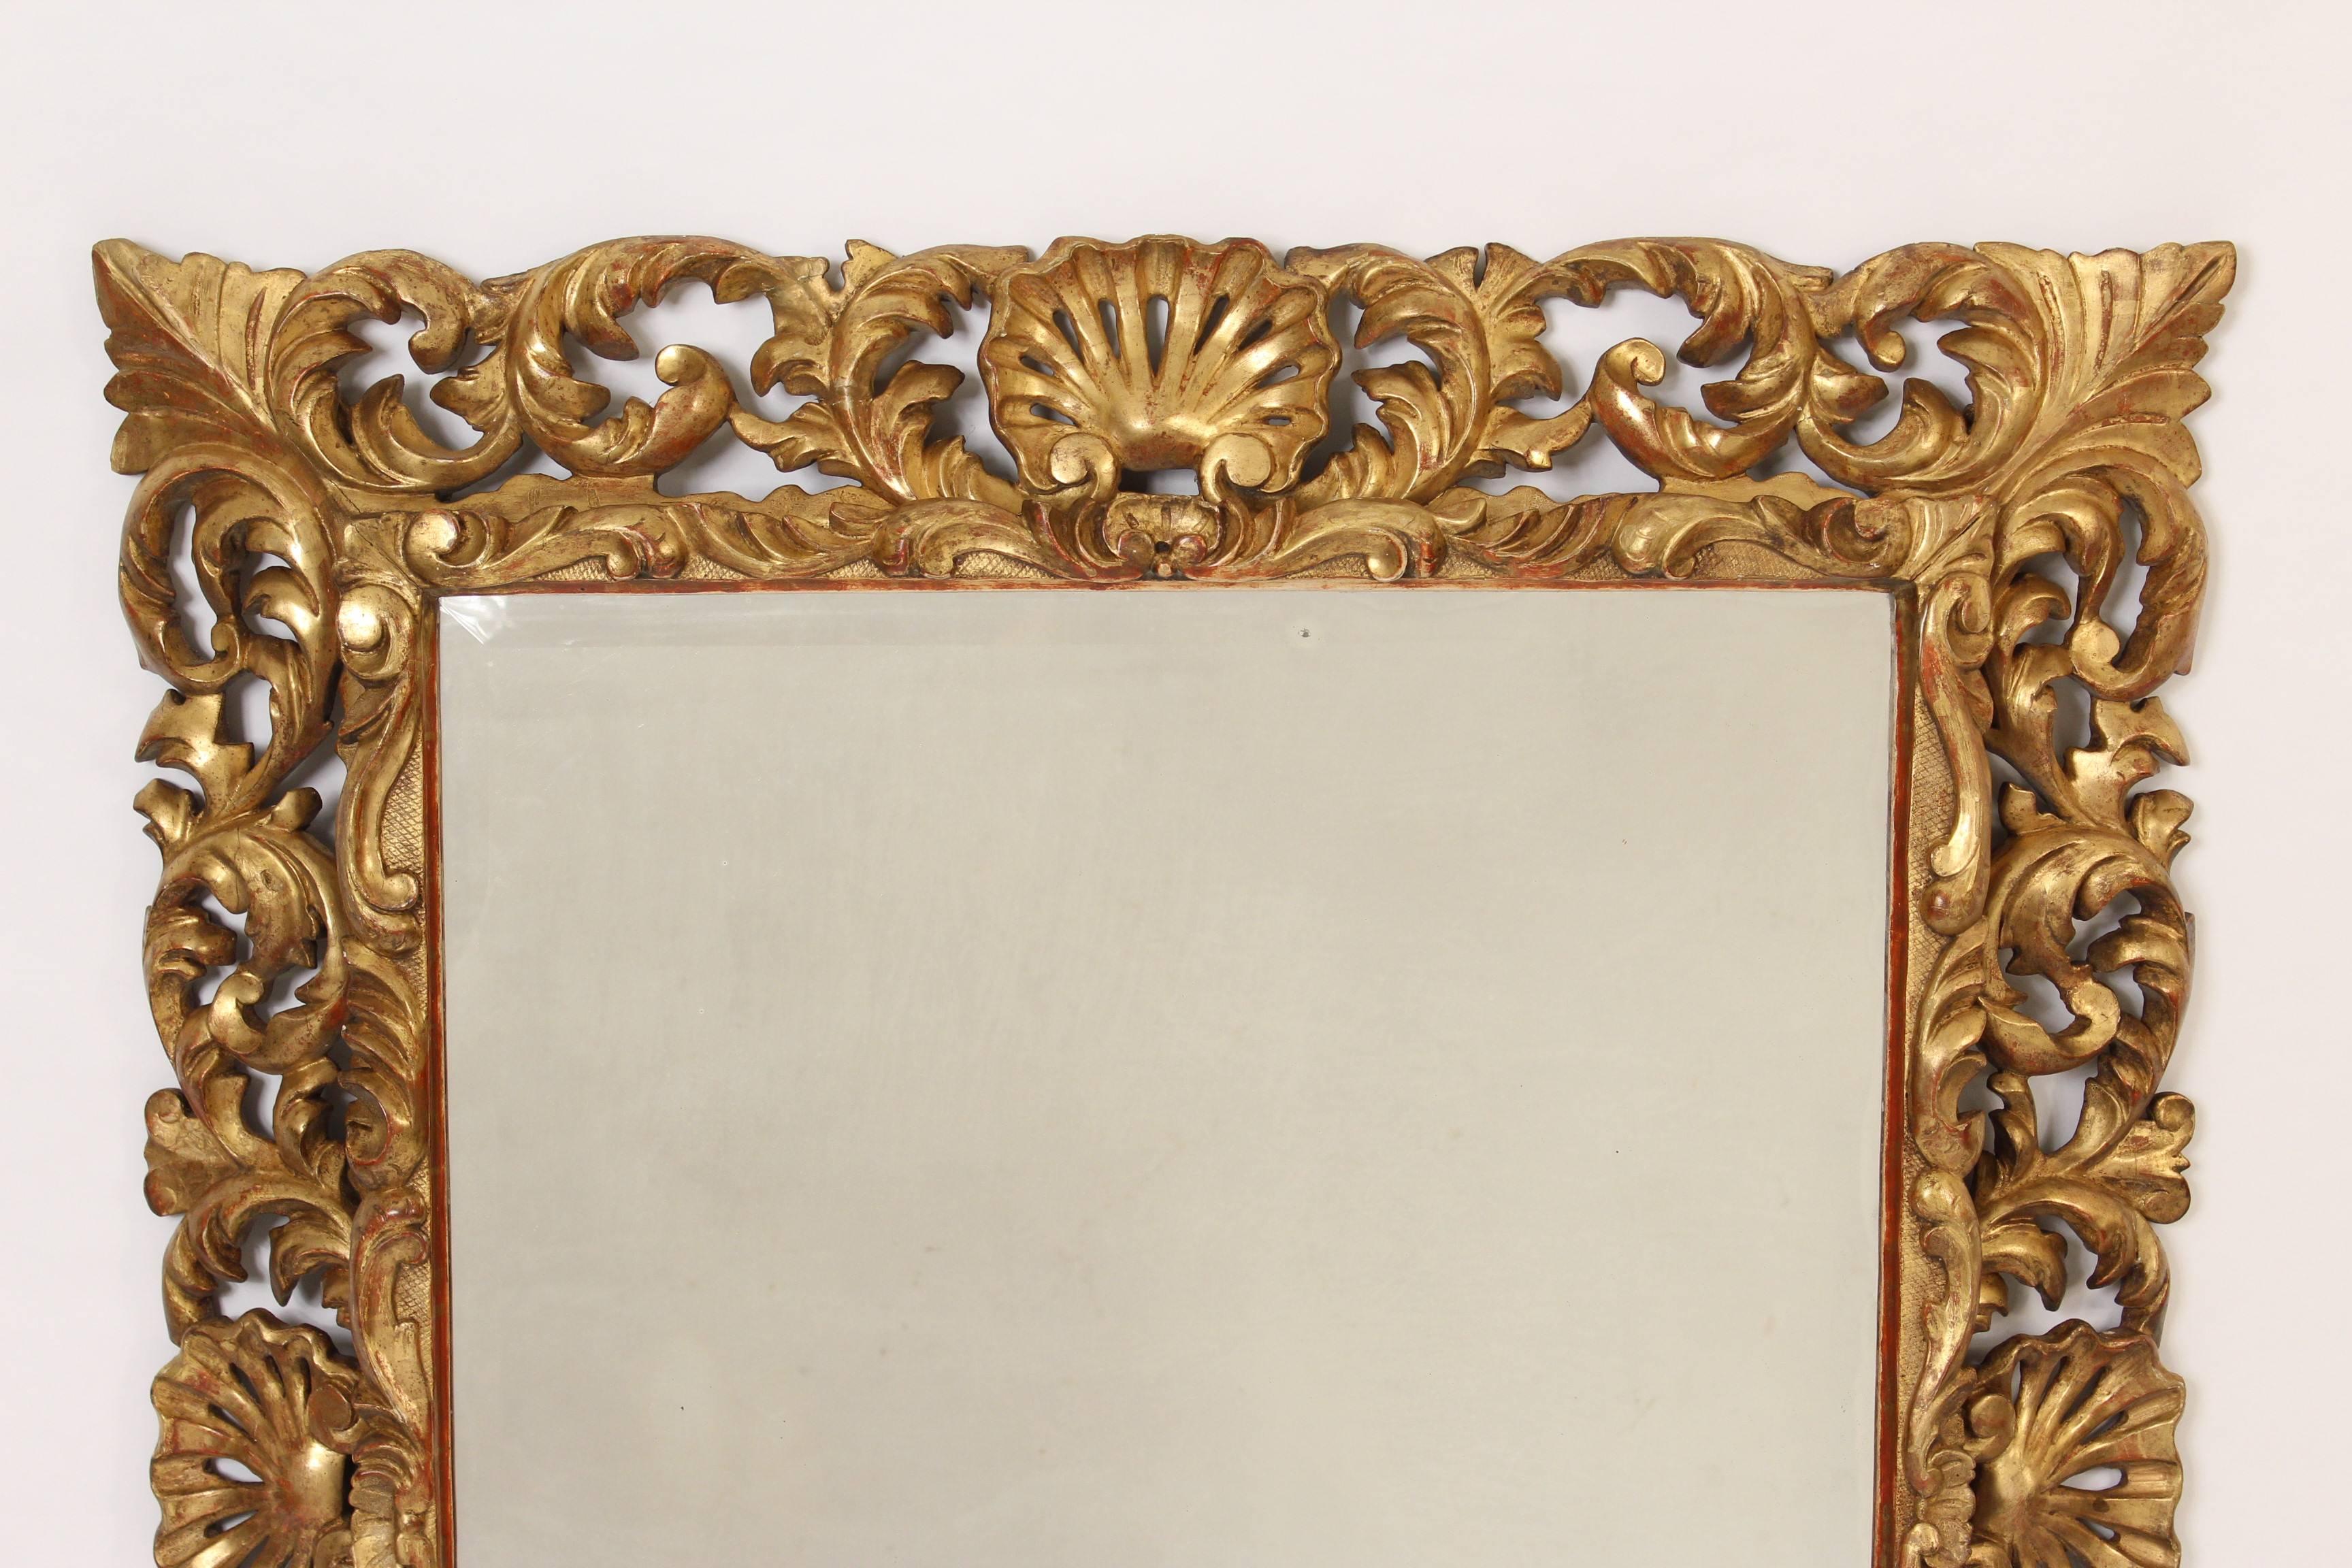 Antique Baroque style giltwood mirror having deep carved shell and foliate carvings with a bevelled glass mirror, 19th century.